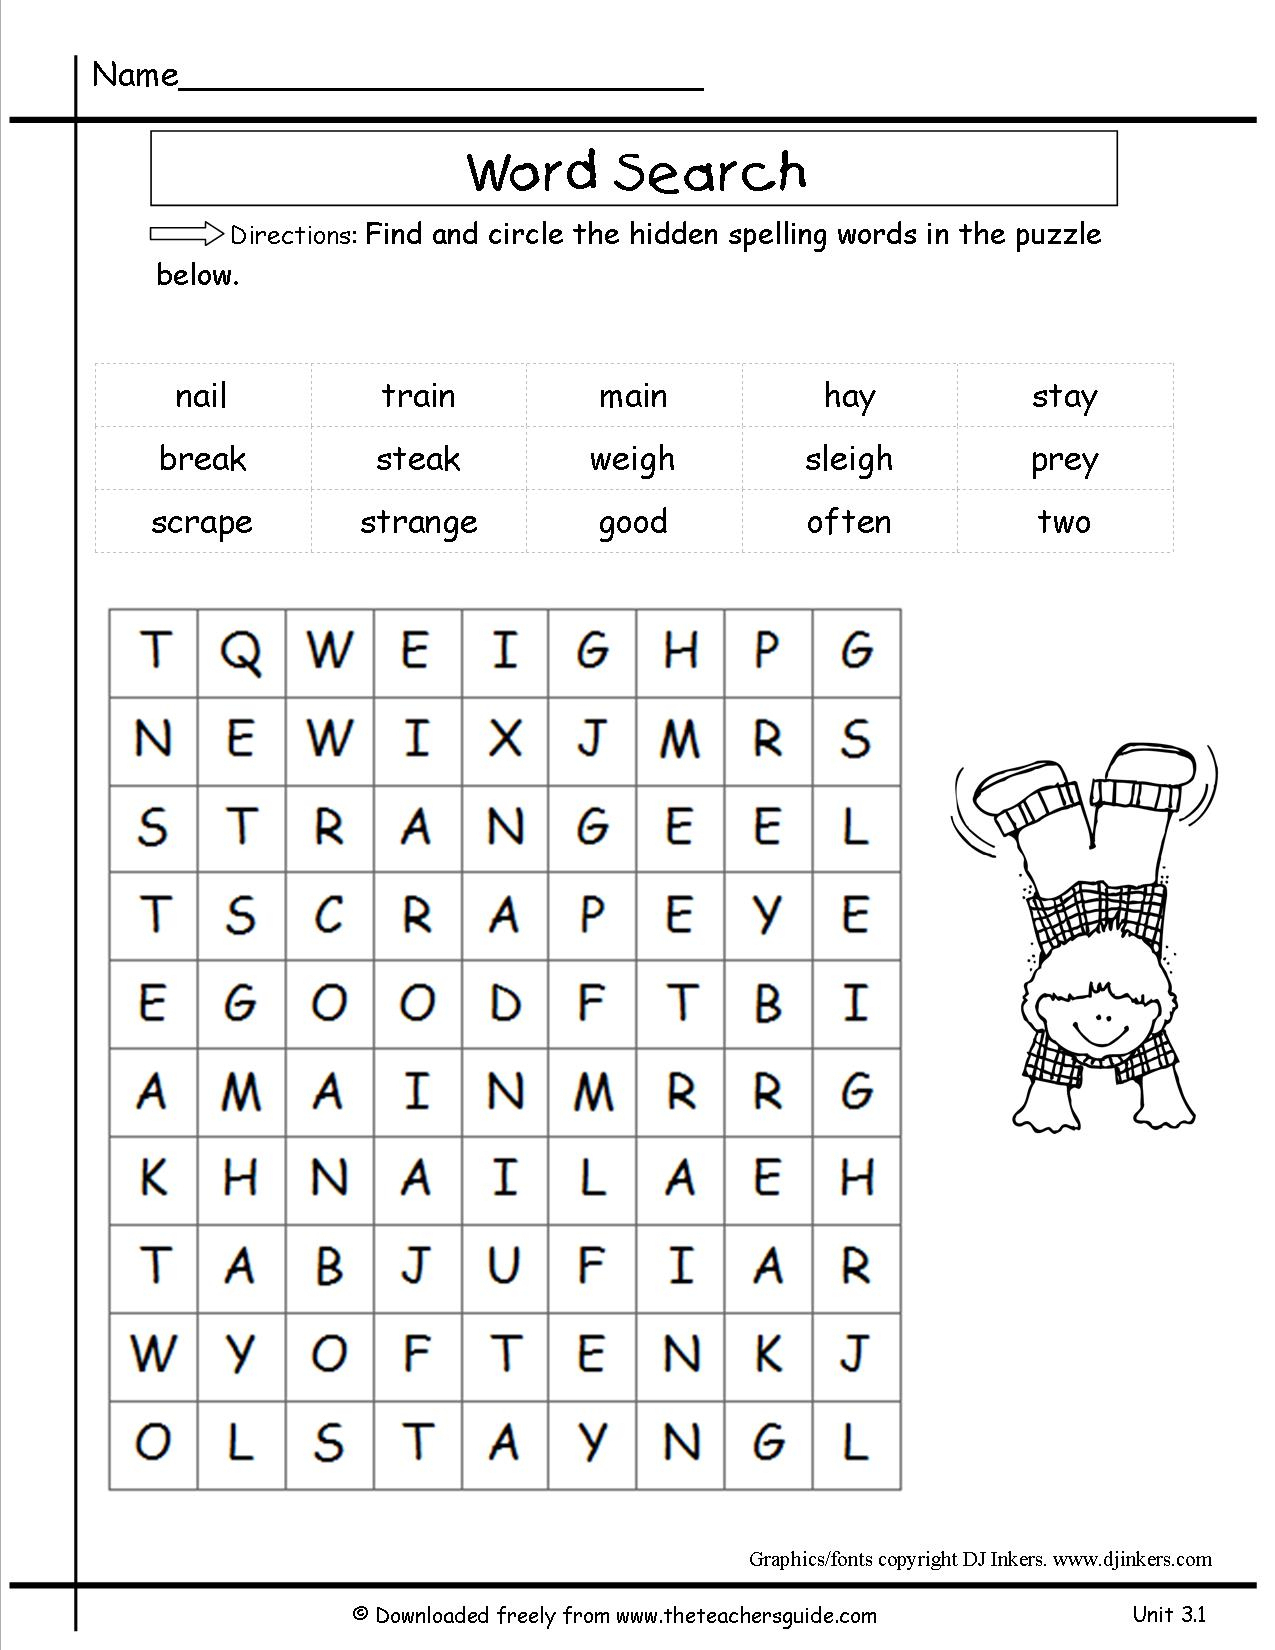 Printable Crossword Puzzles For 2nd Graders | Printable Crossword